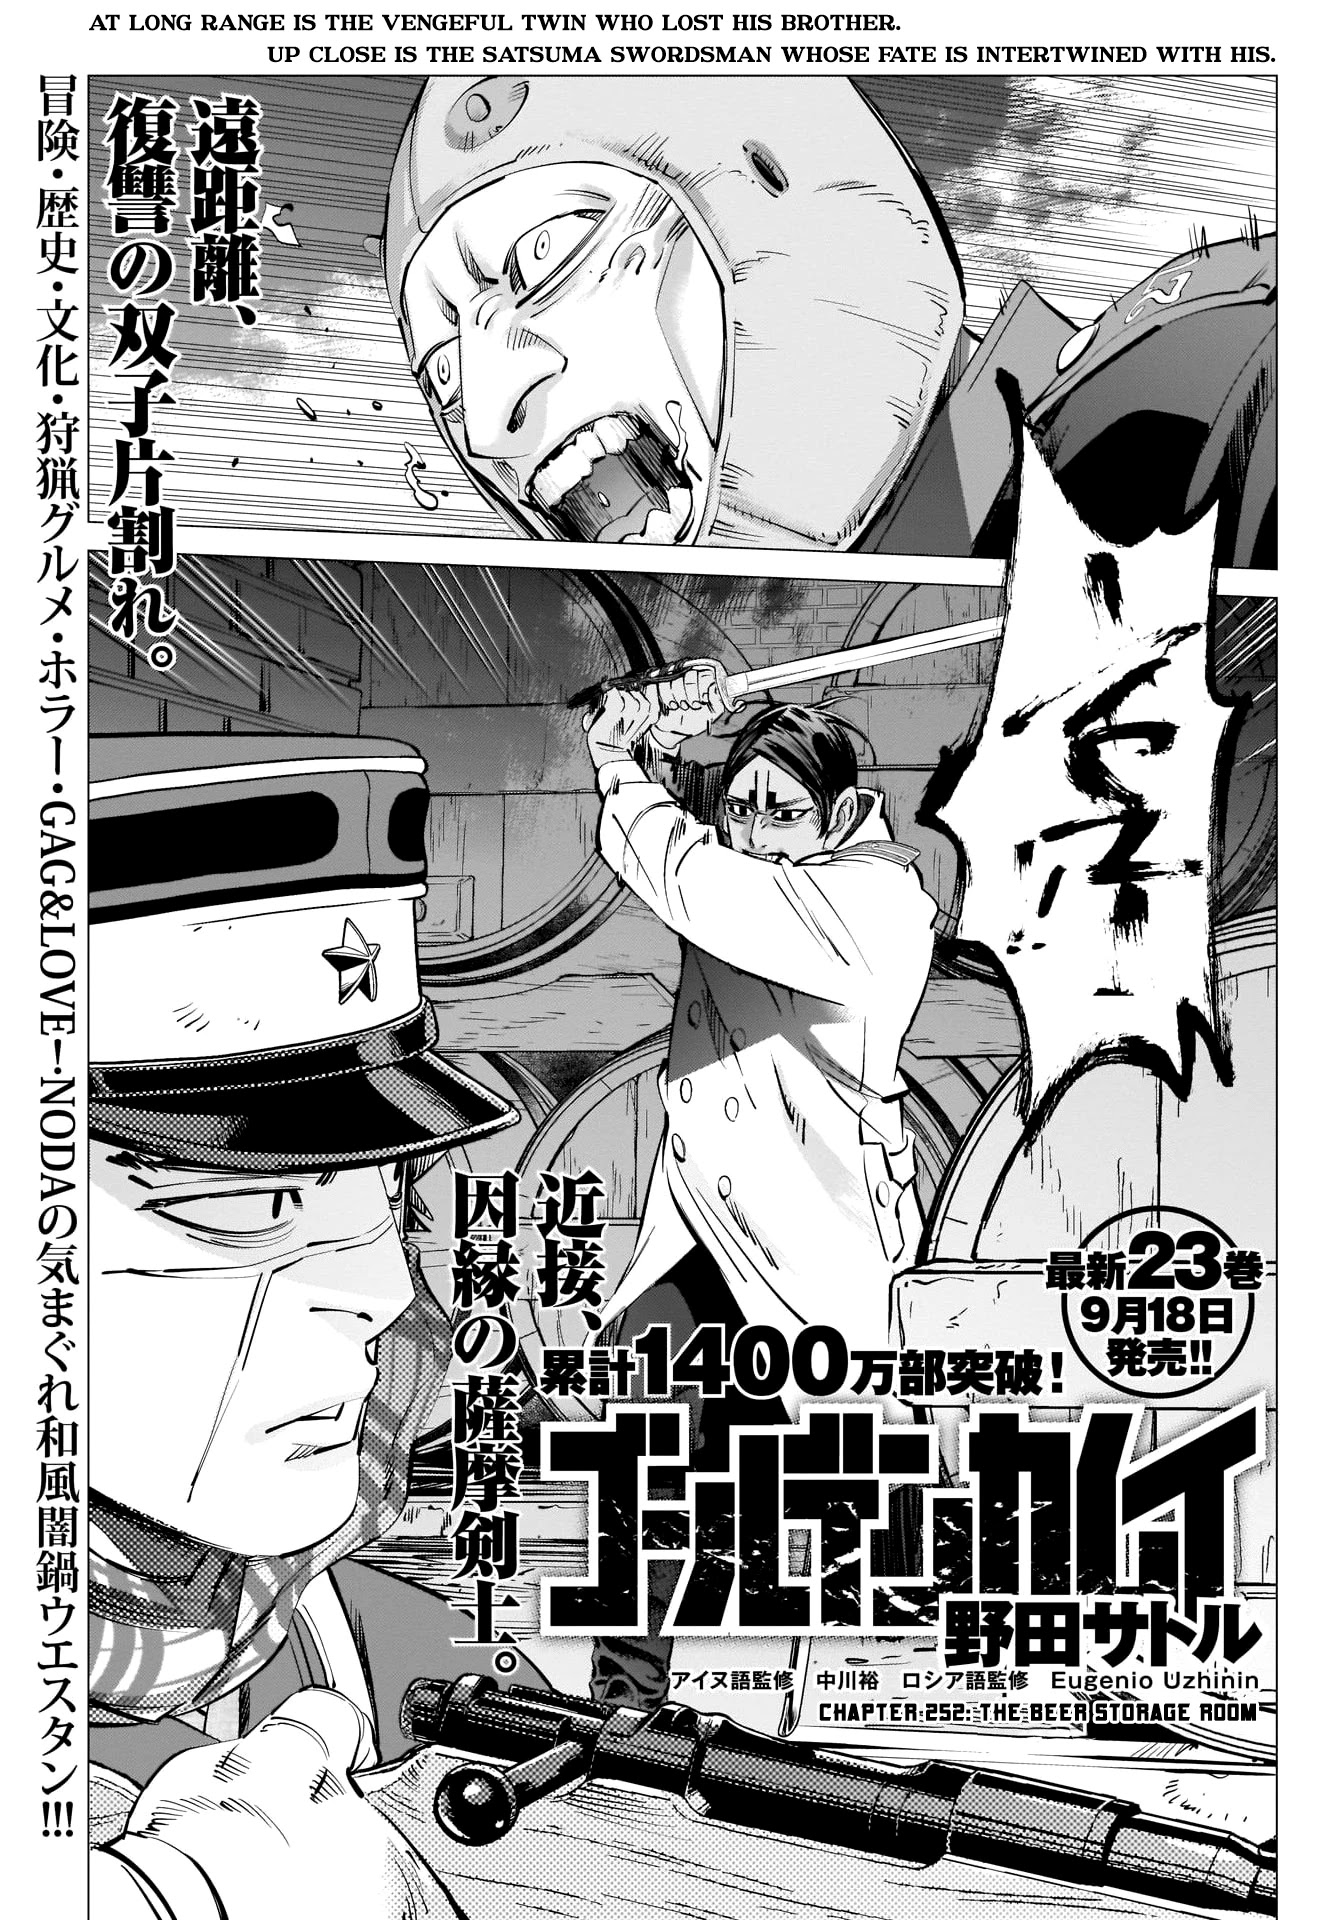 Golden Kamui Chapter 252: The Beer Storage Room - Picture 1